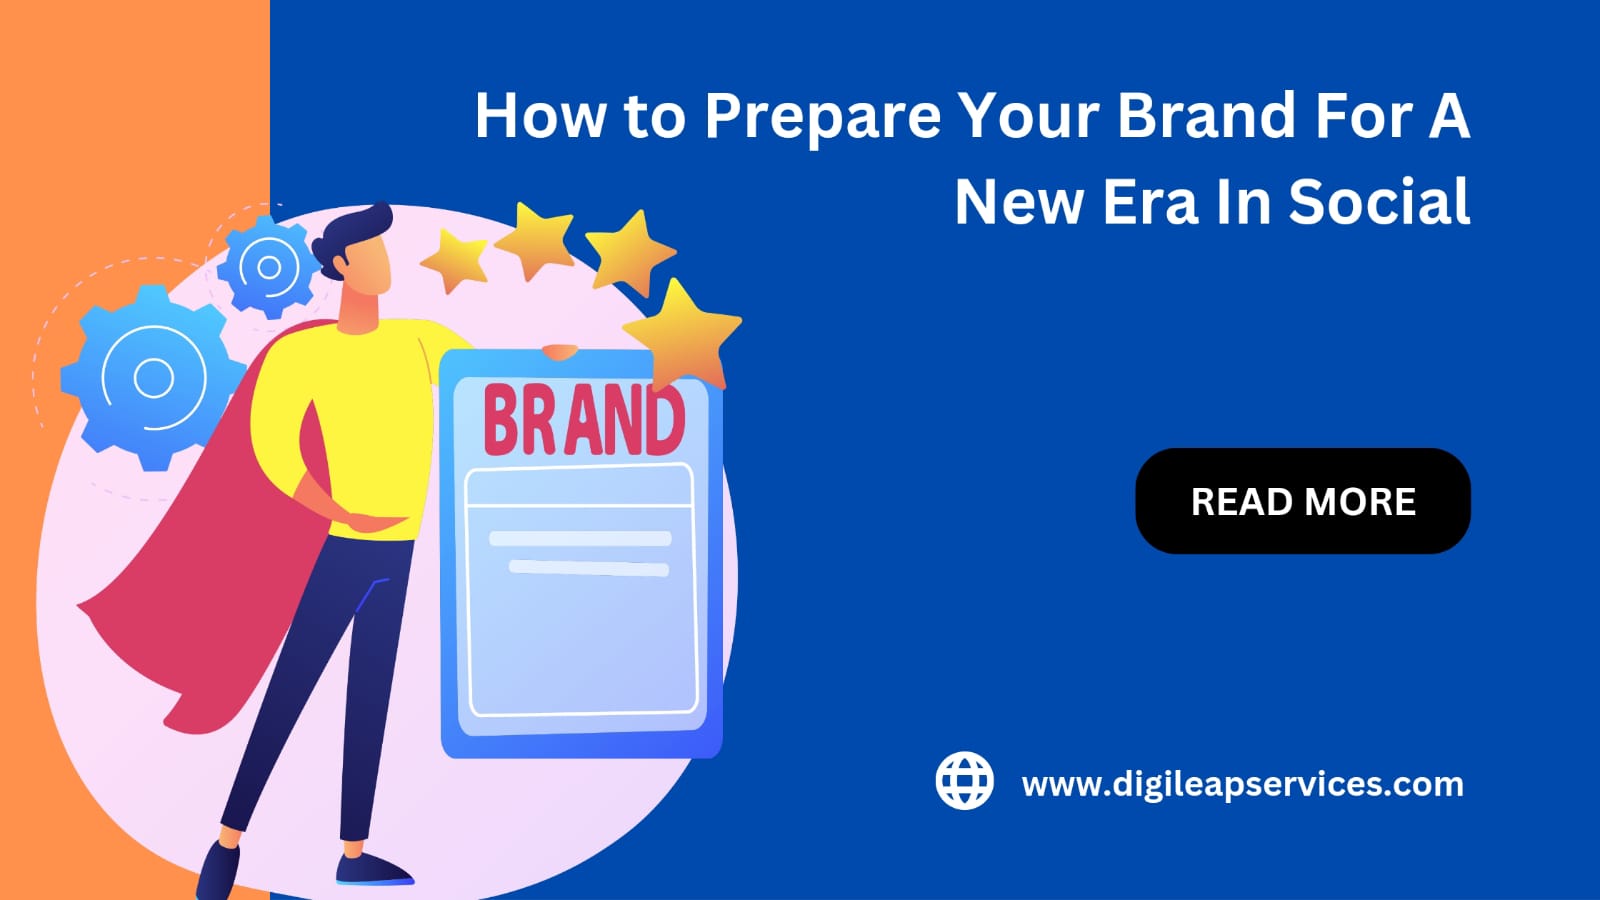 How to Prepare Your Brand for a New Era in Social